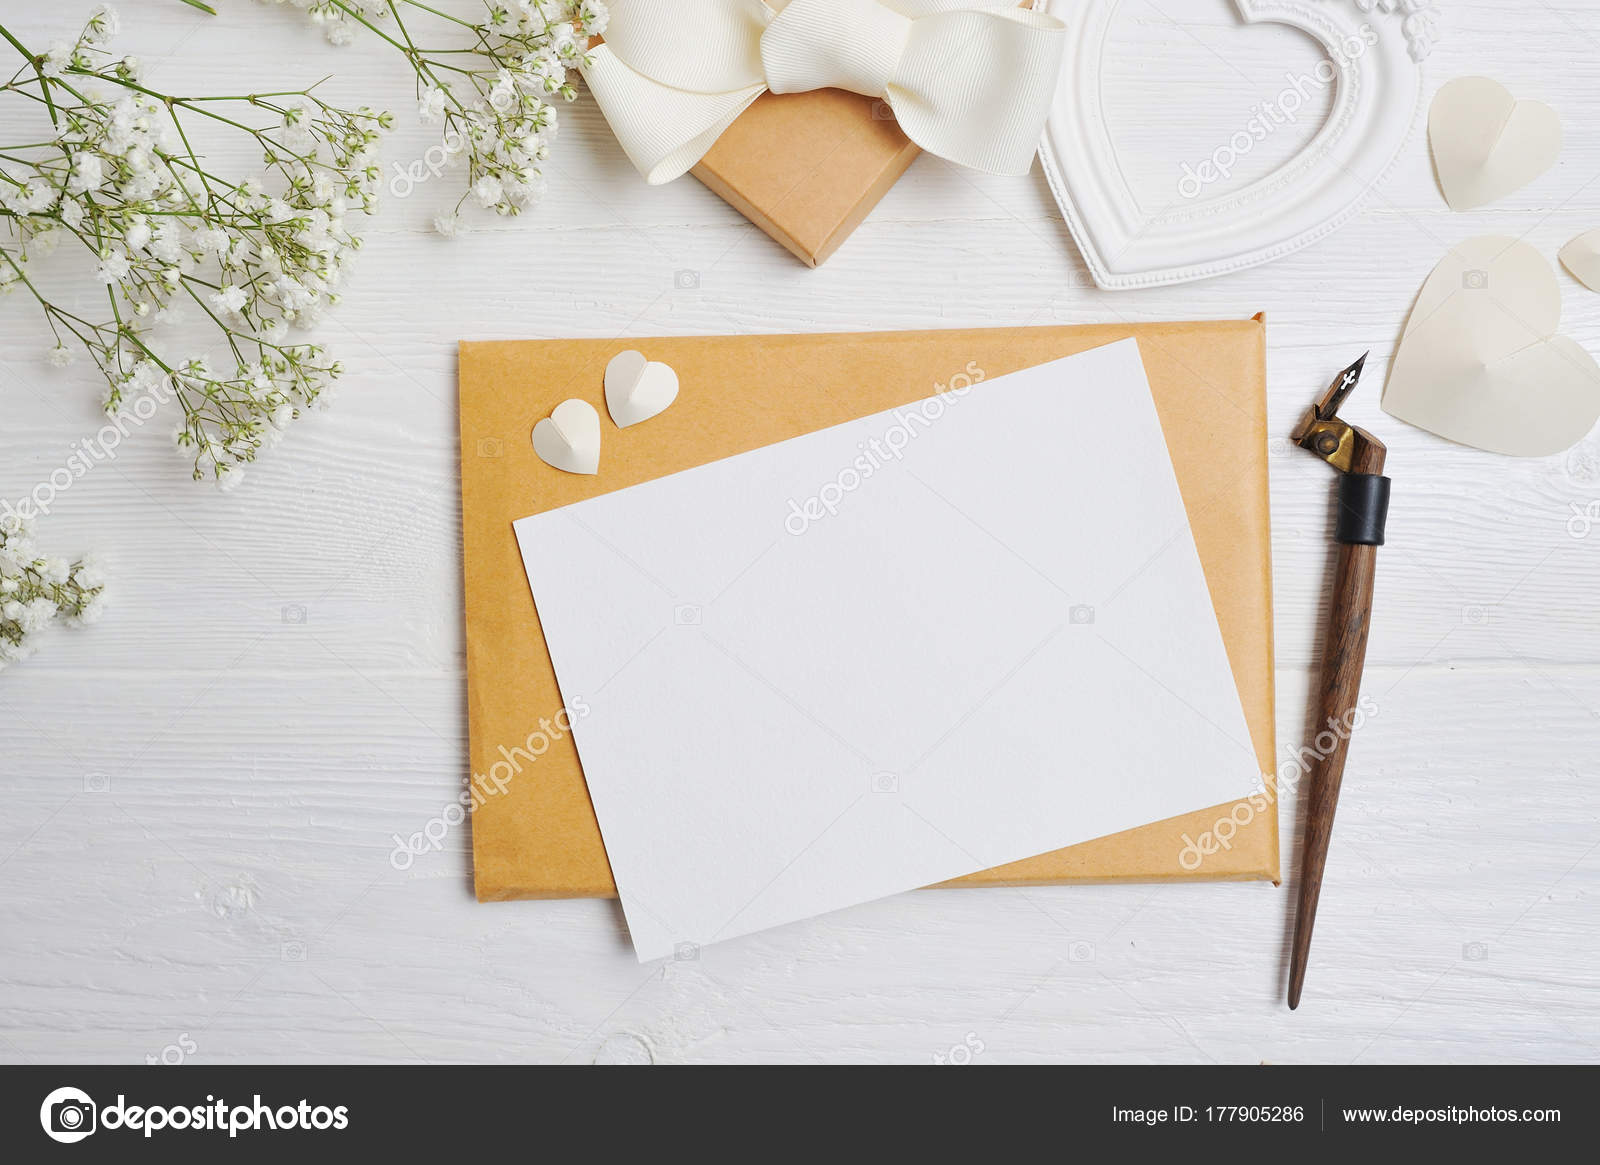 Download Mockup Letter With A Calligraphic Pen Greeting Card For St Valentines Day In Rustic Style With Place For Your Text Flat Lay Top View Photo Mock Up Stock Photo Image By C